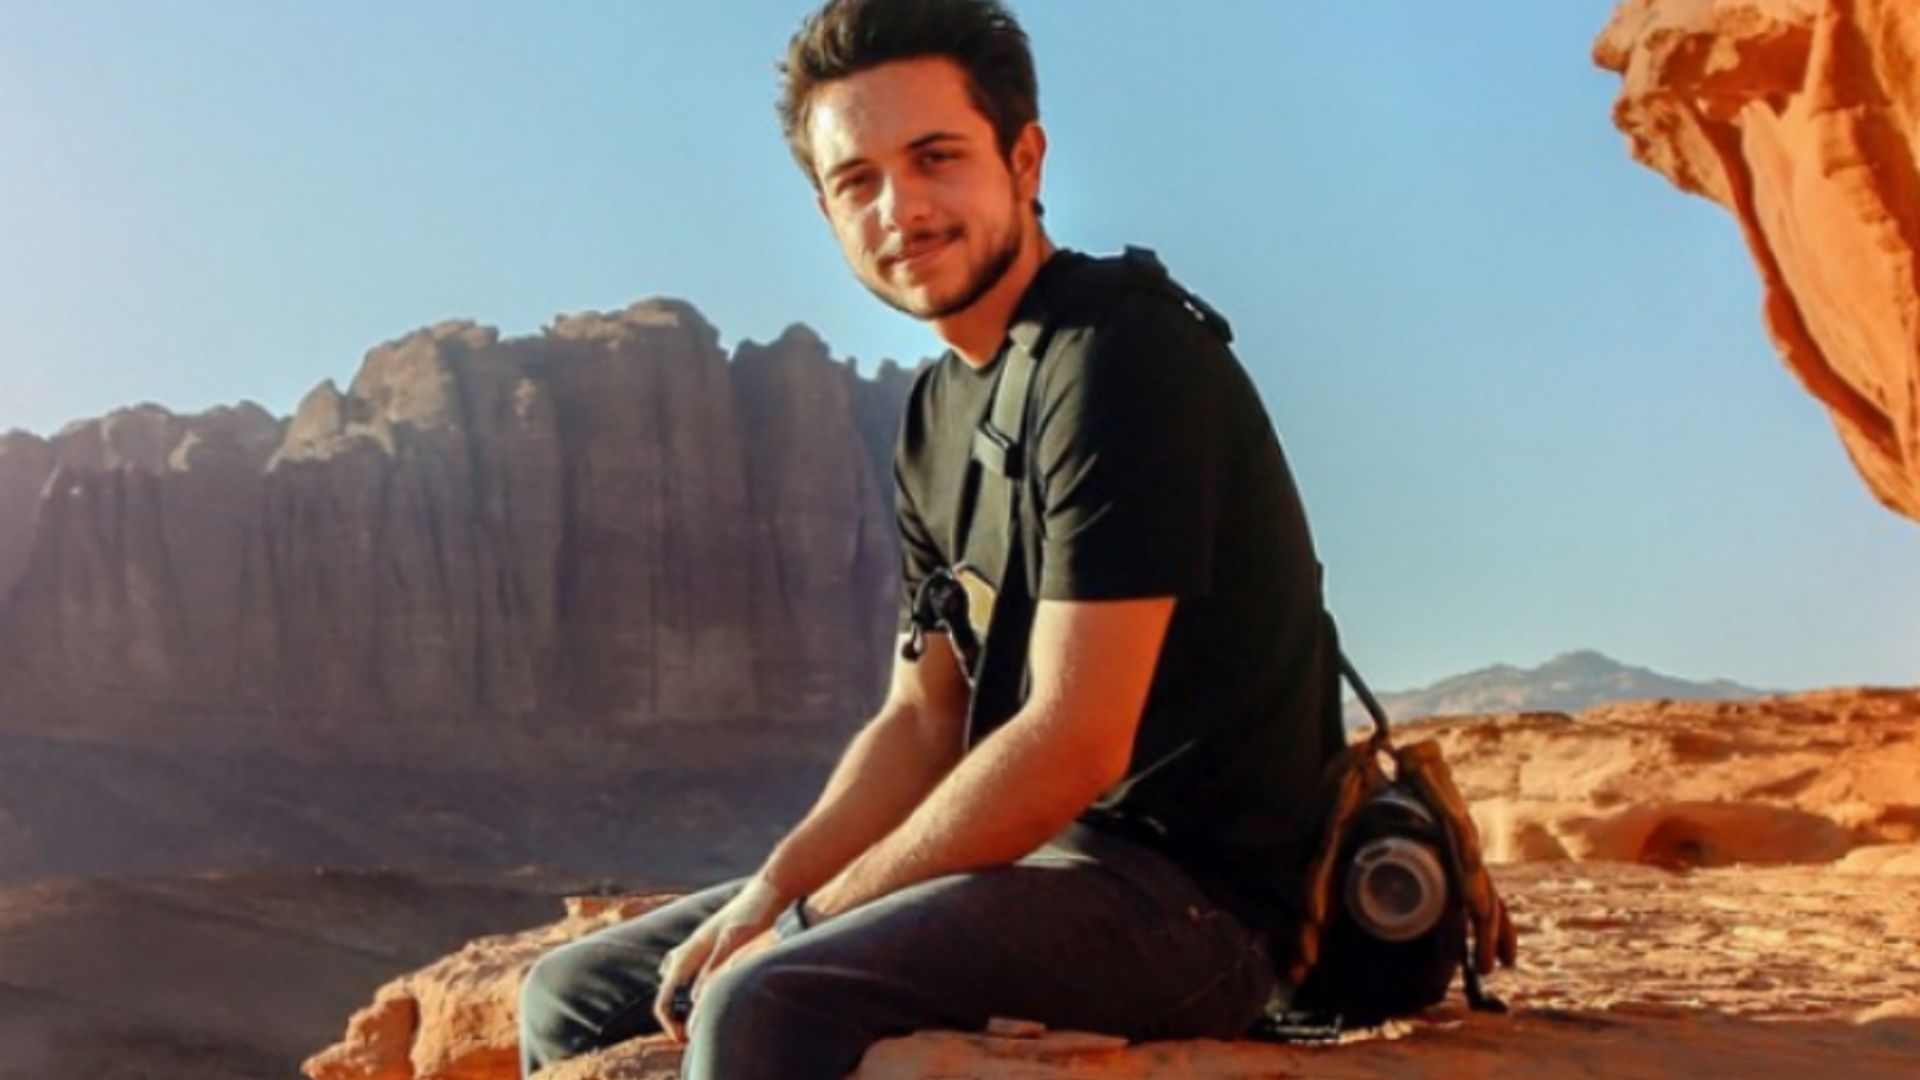 These facts about Crown Prince Hussein, Jordan's future king may surprise you